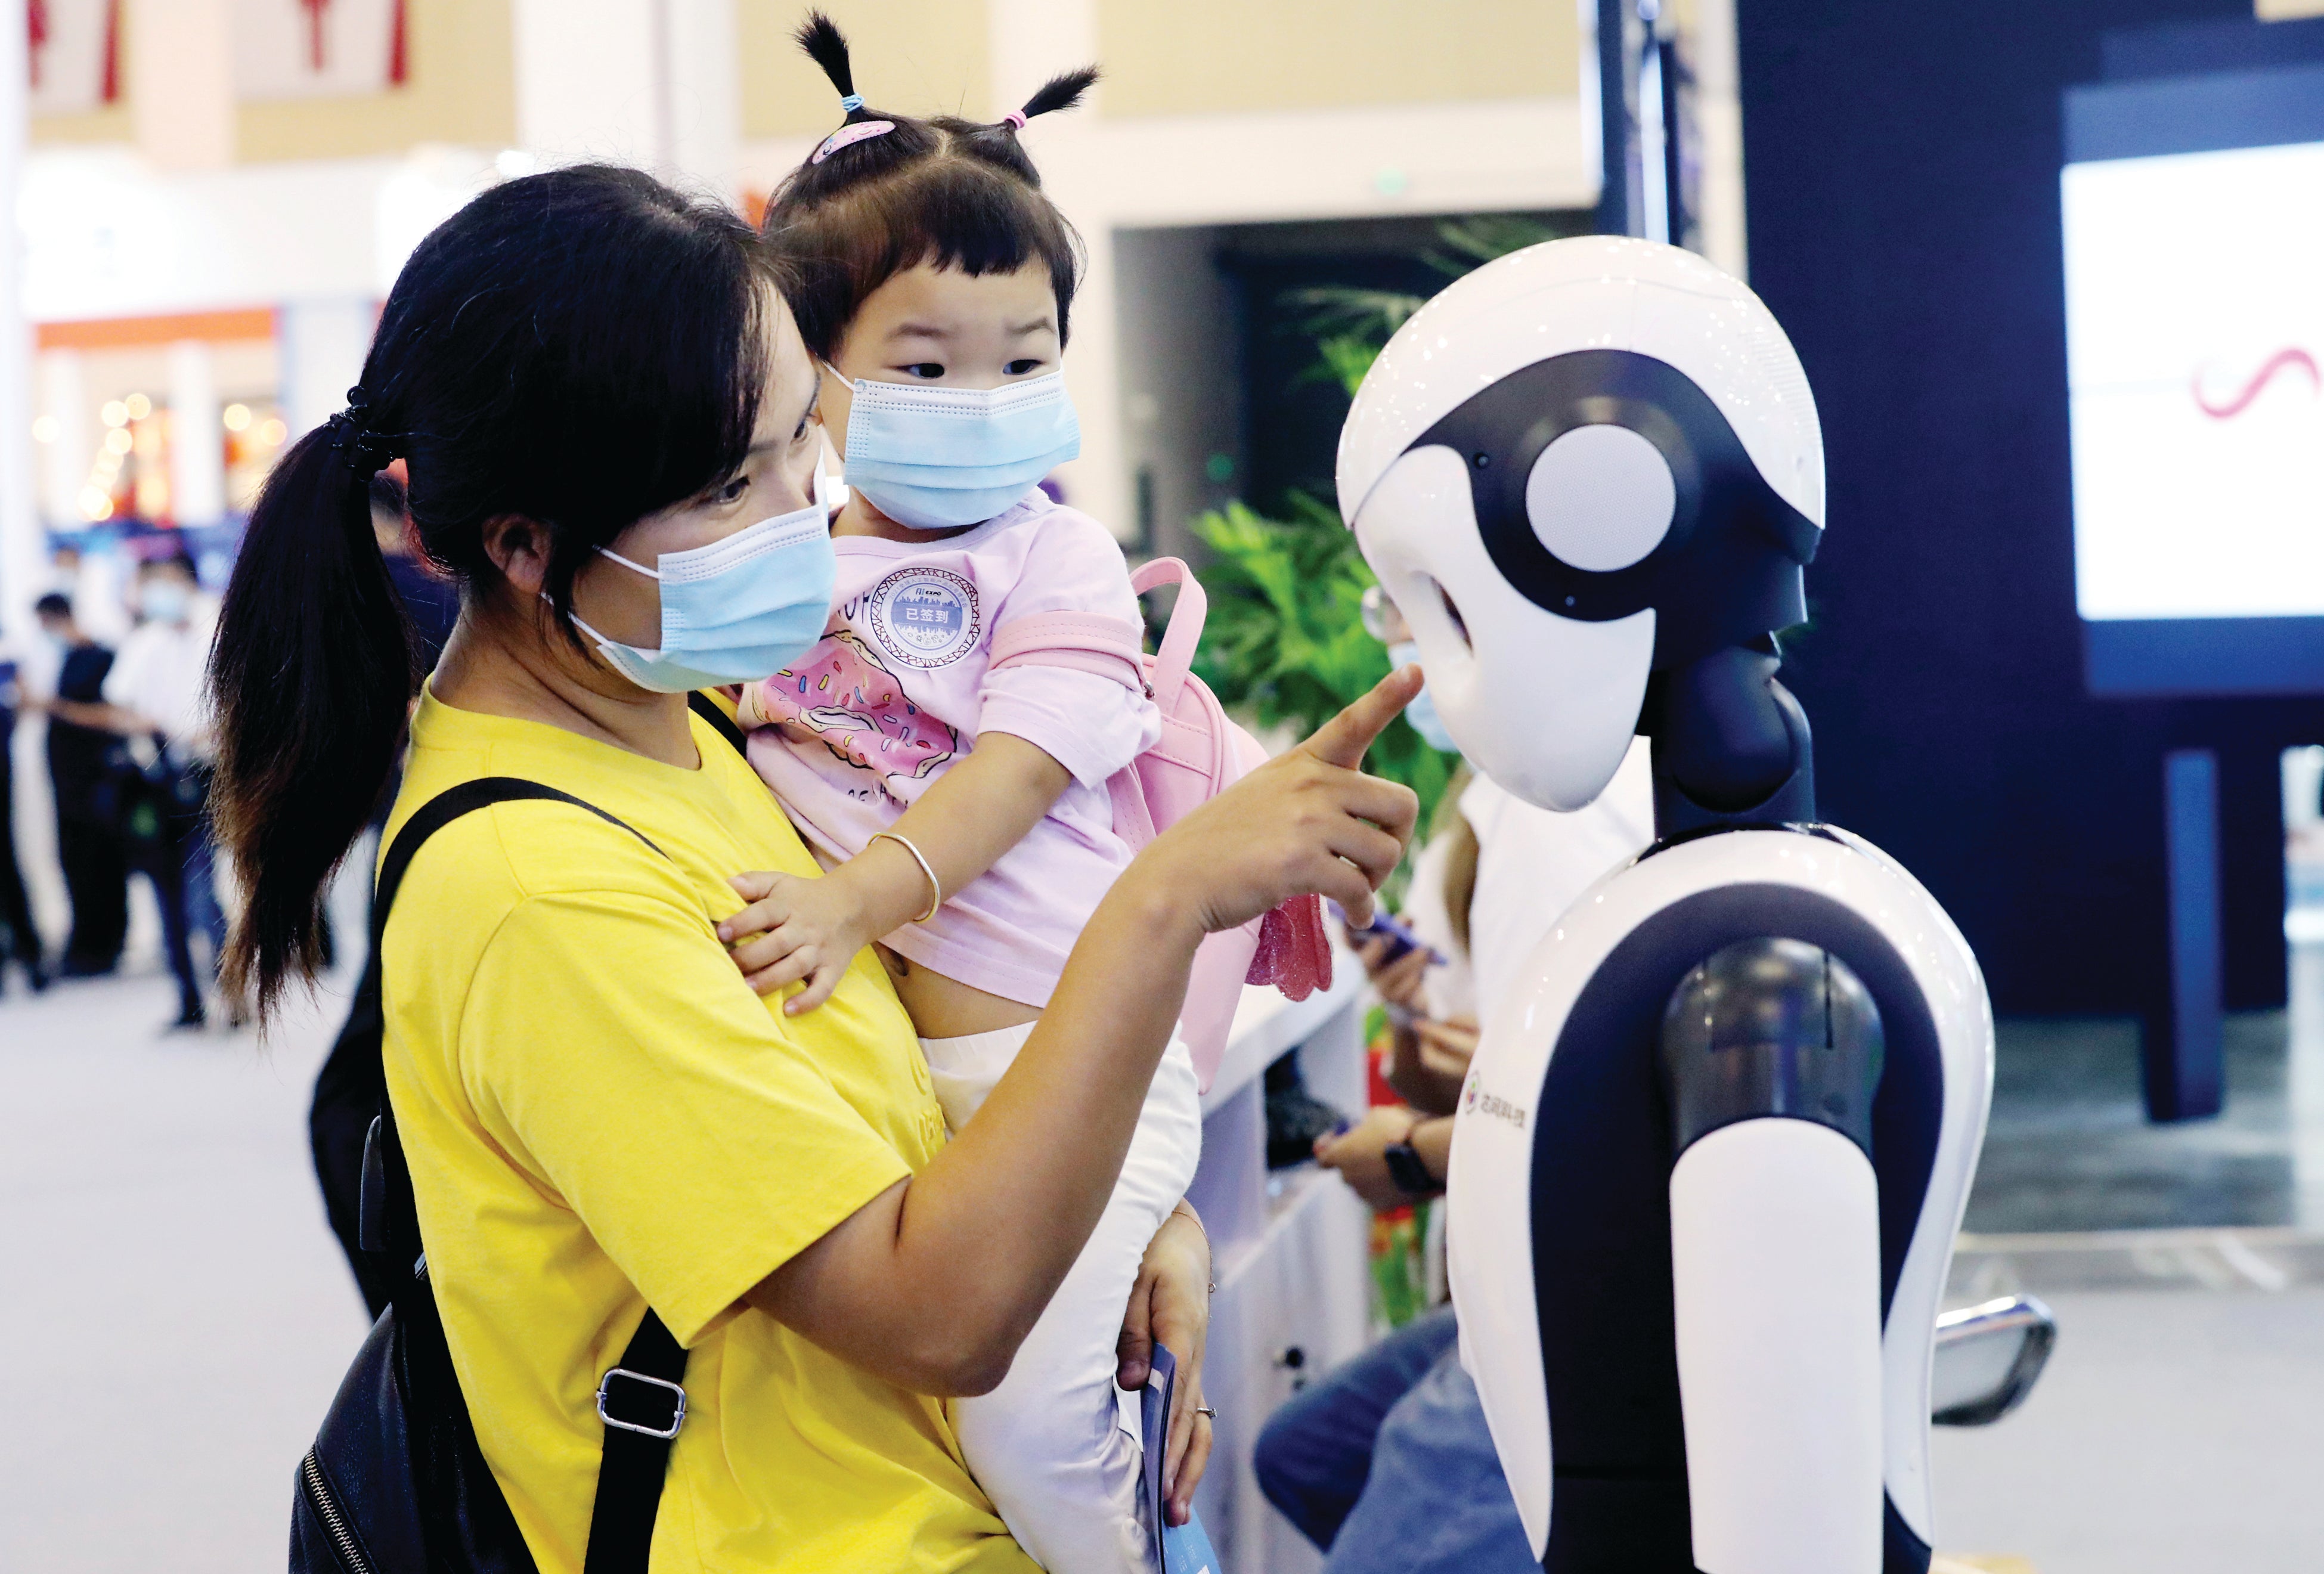 A mother and her daughter interact with an intelligent robot at an industrial expo in Suzhou, Jiangsu province, in September 2021